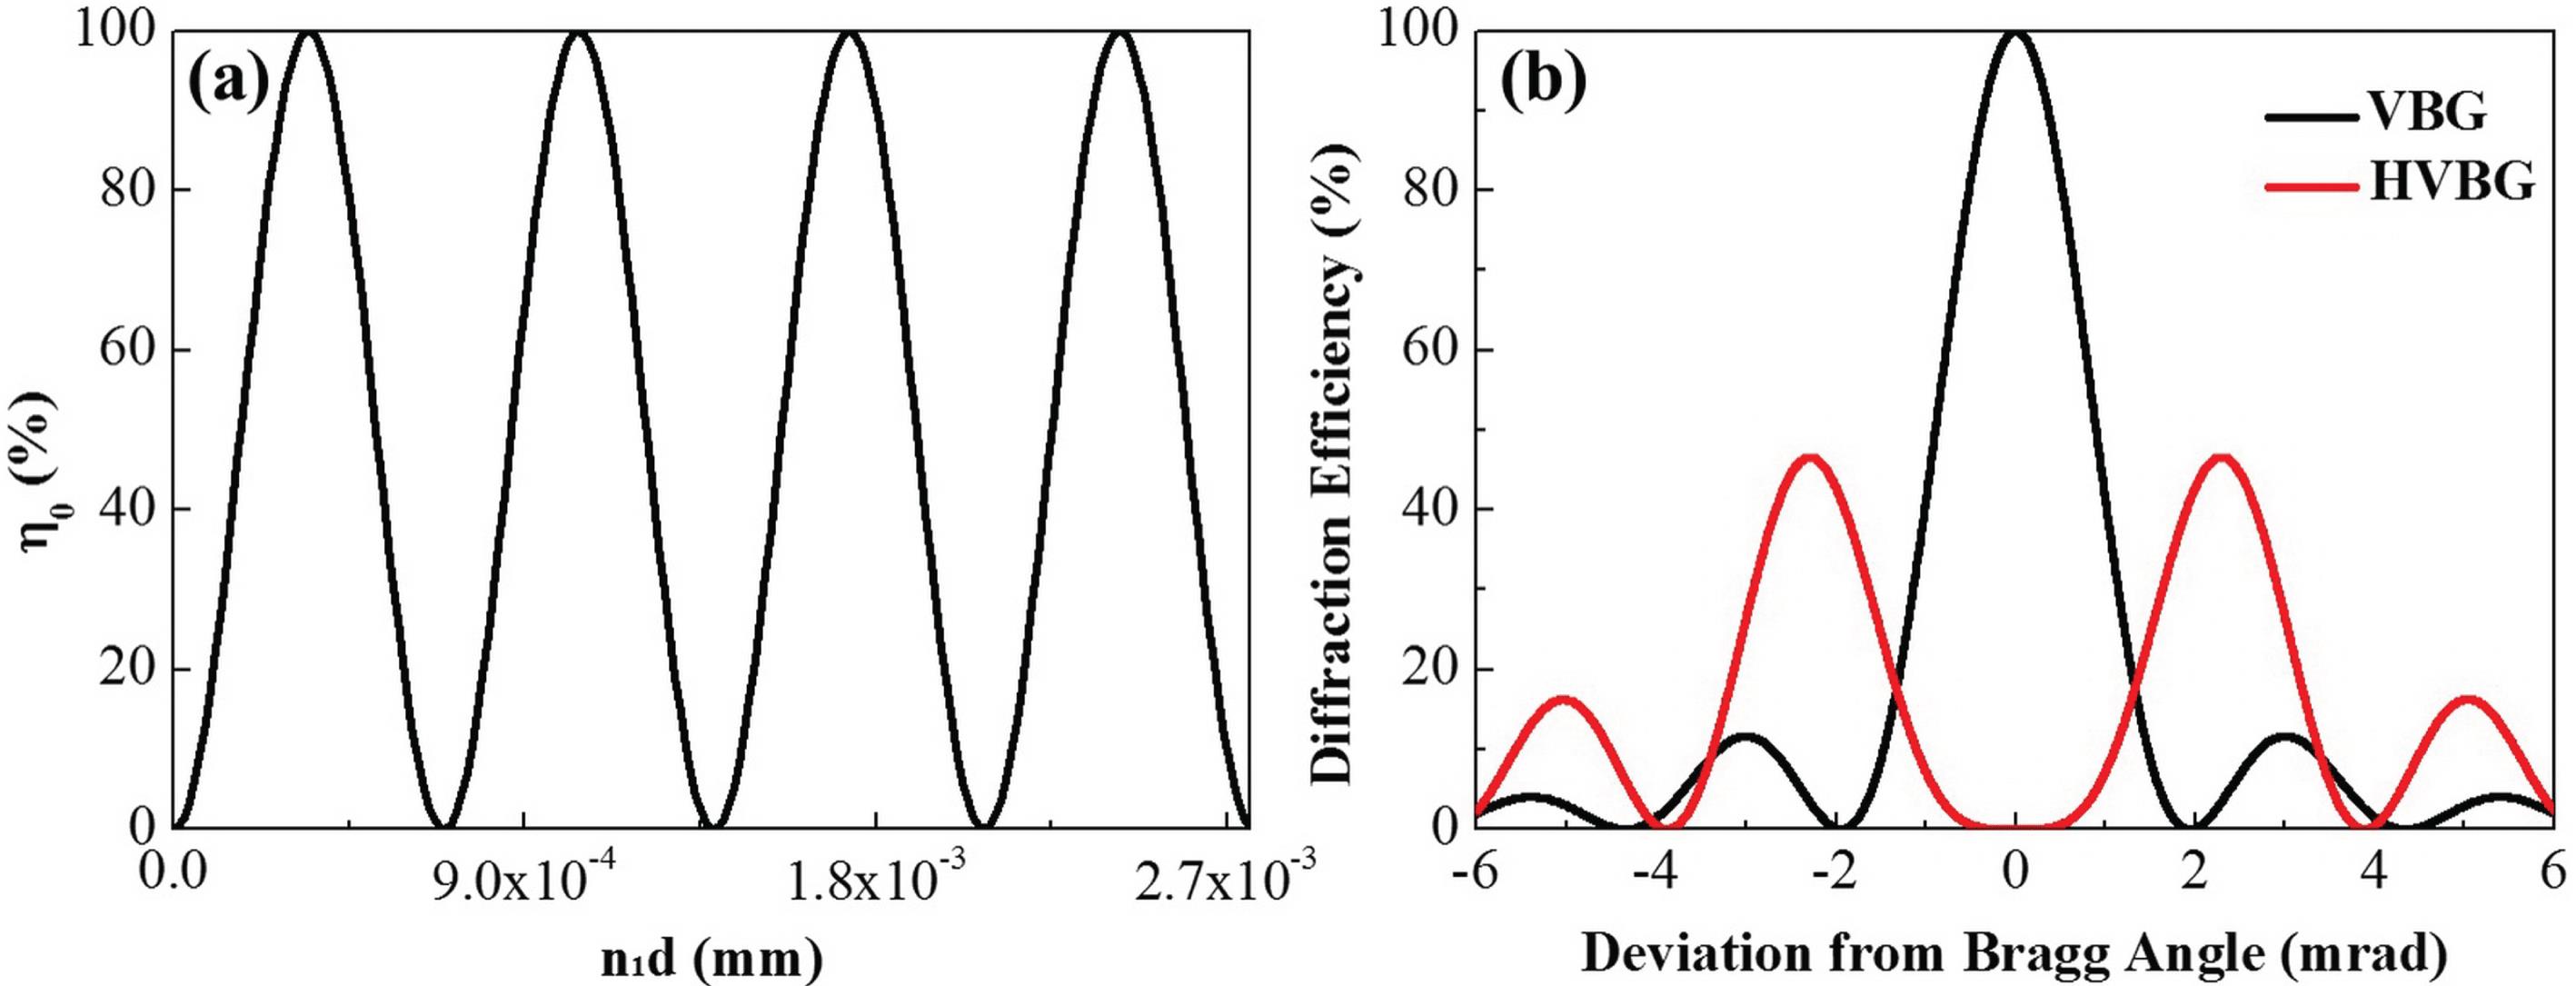 (a) Dependence of the central diffraction efficiency of the VBG on the product of the refractive index modulation and grating thickness; (b) angular selectivity of the VBG and HVBG.